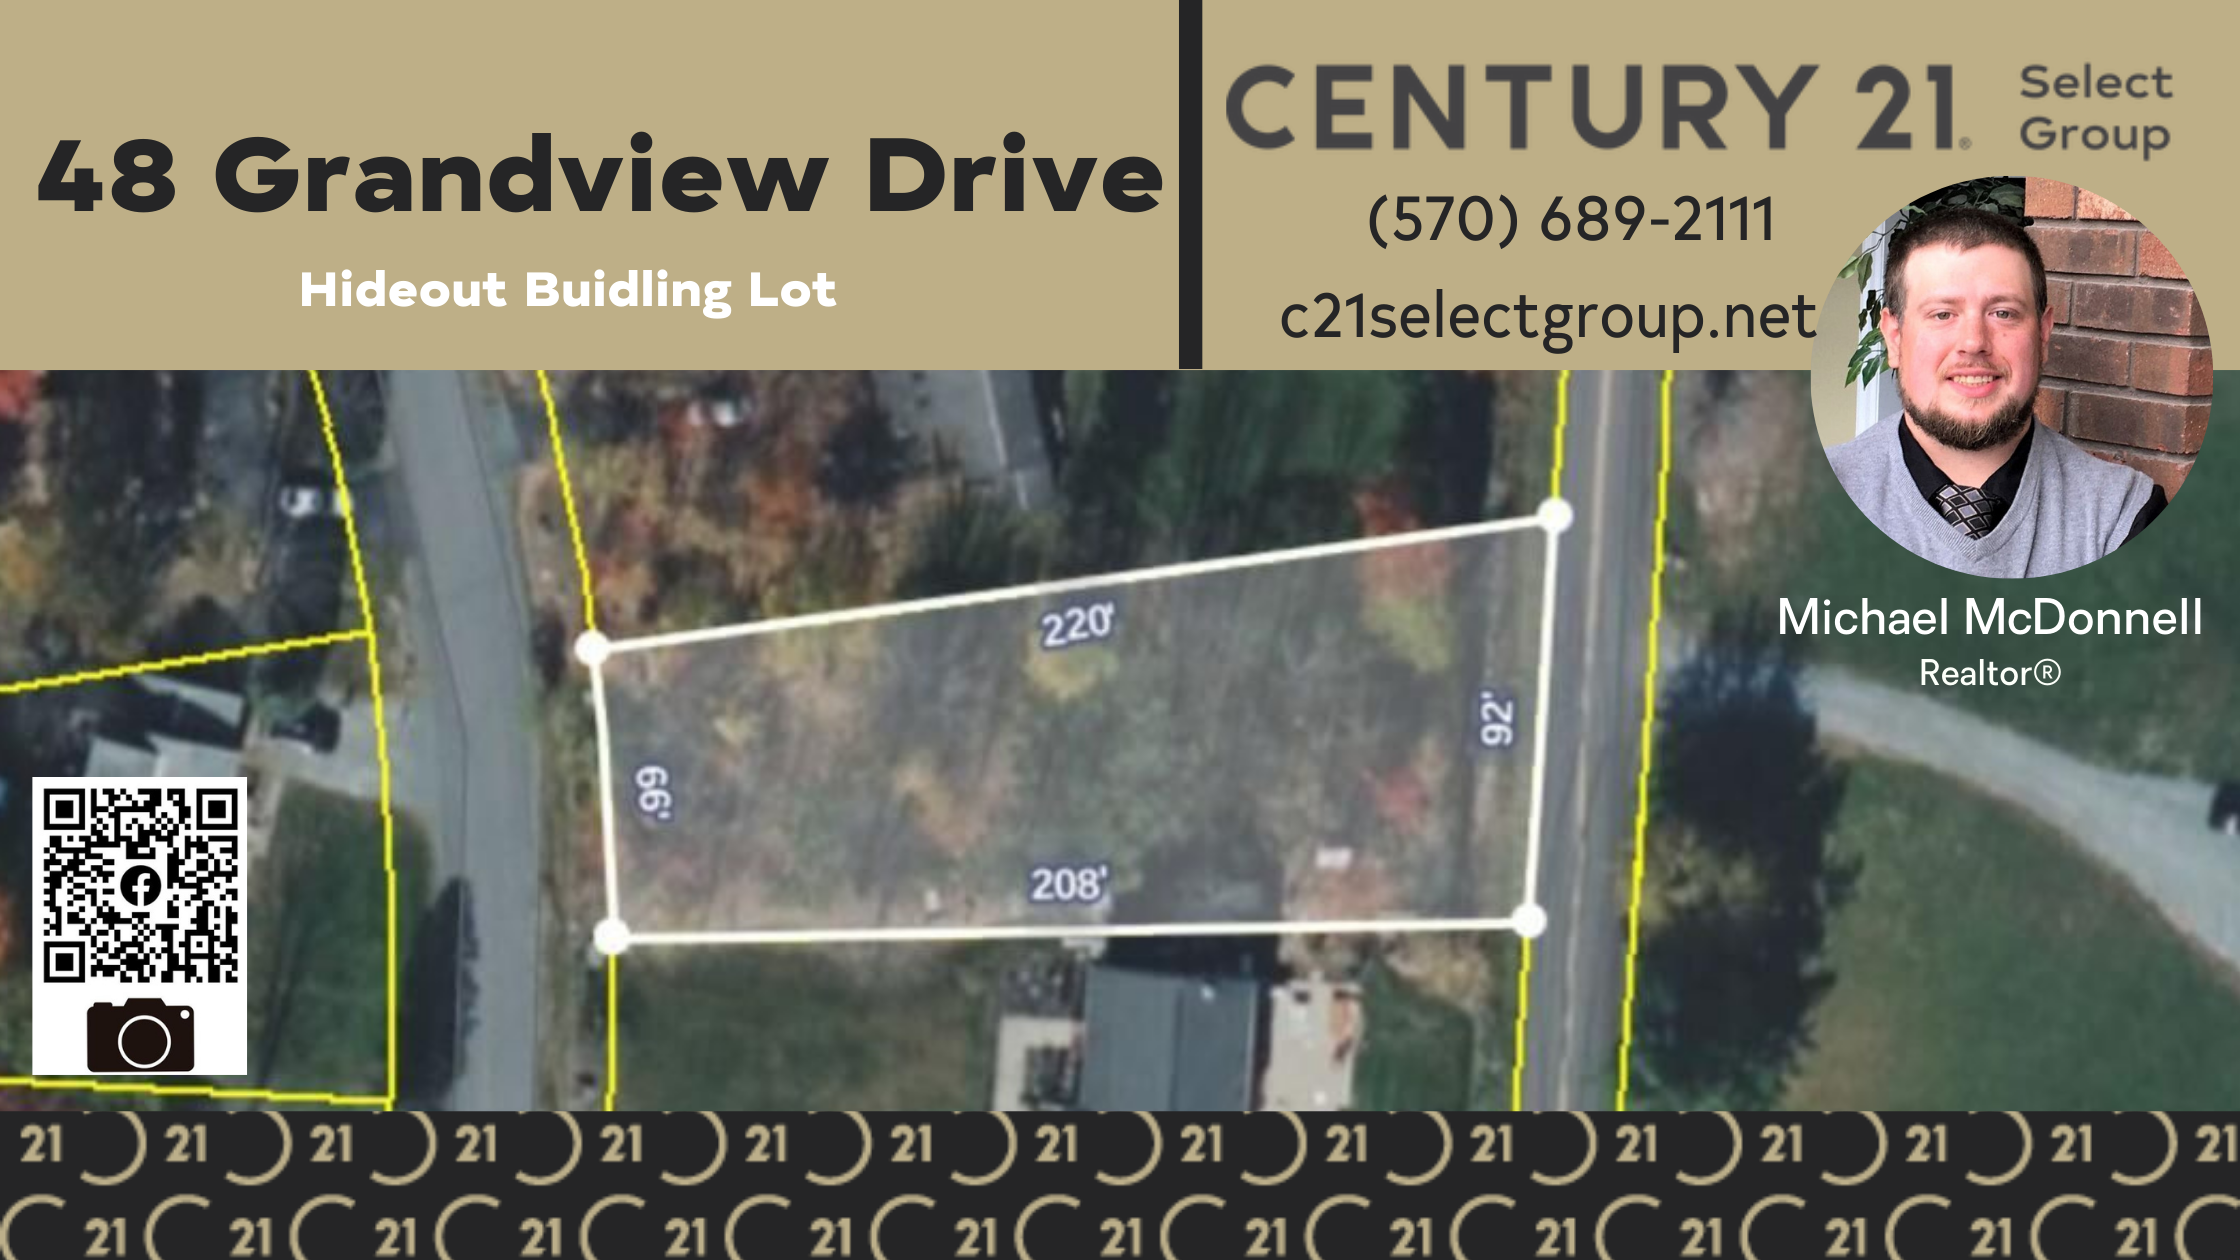 48 Grandview Drive: Forested Building Lot in The Hideout Community